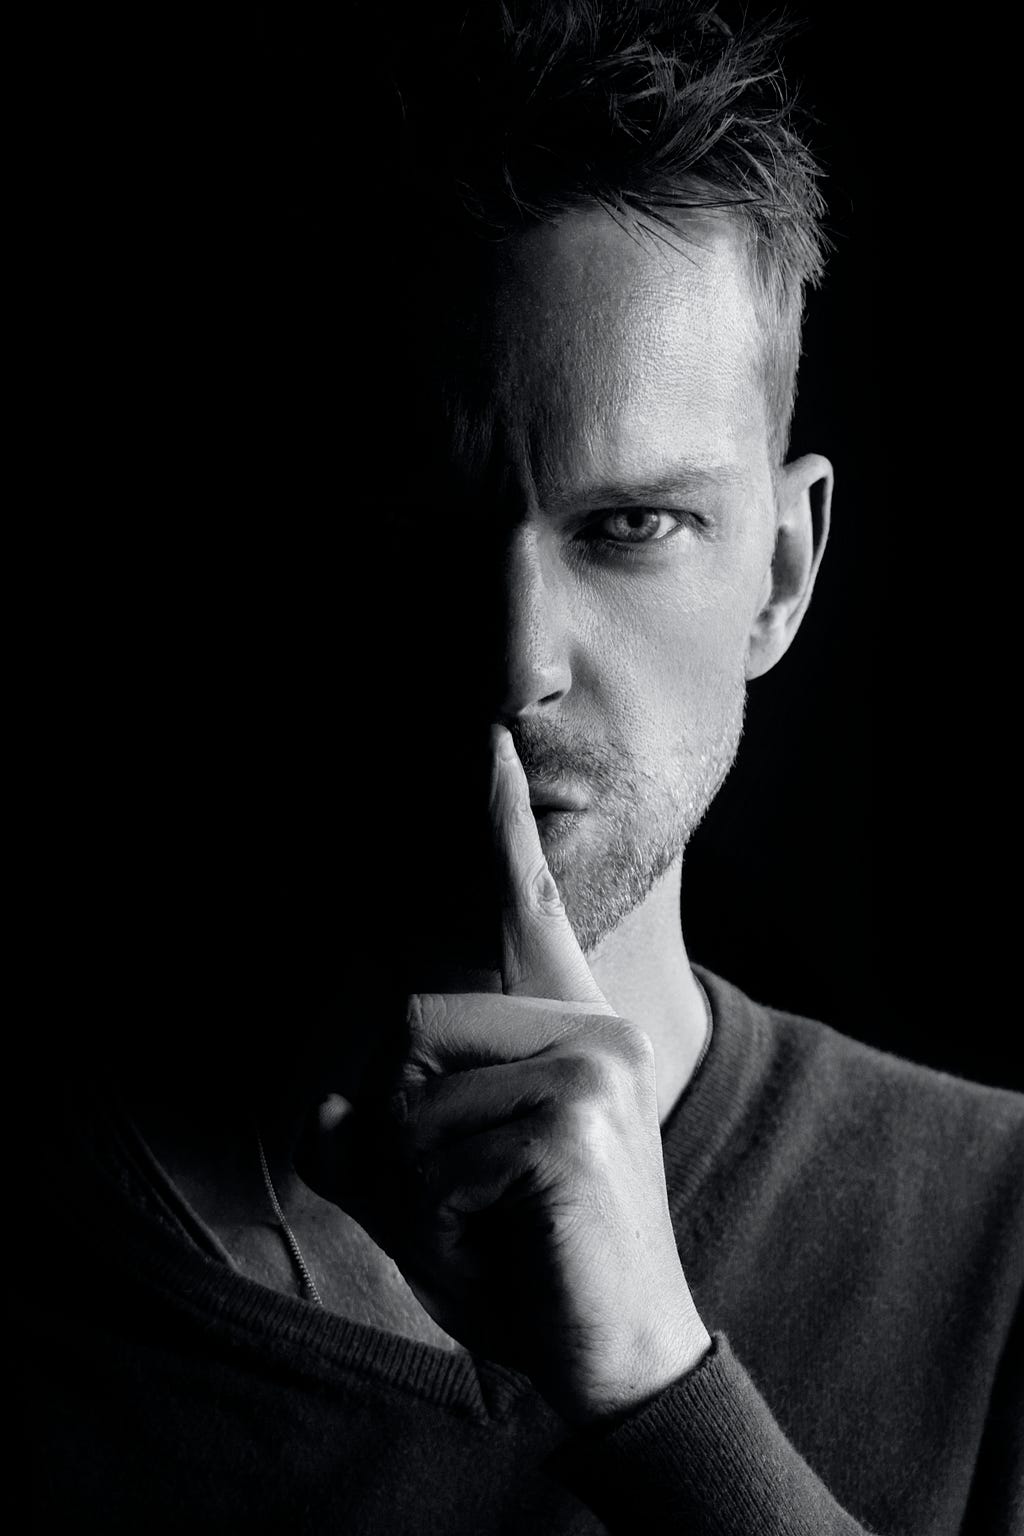 Half-hidden face of a man with his finger over his lips.